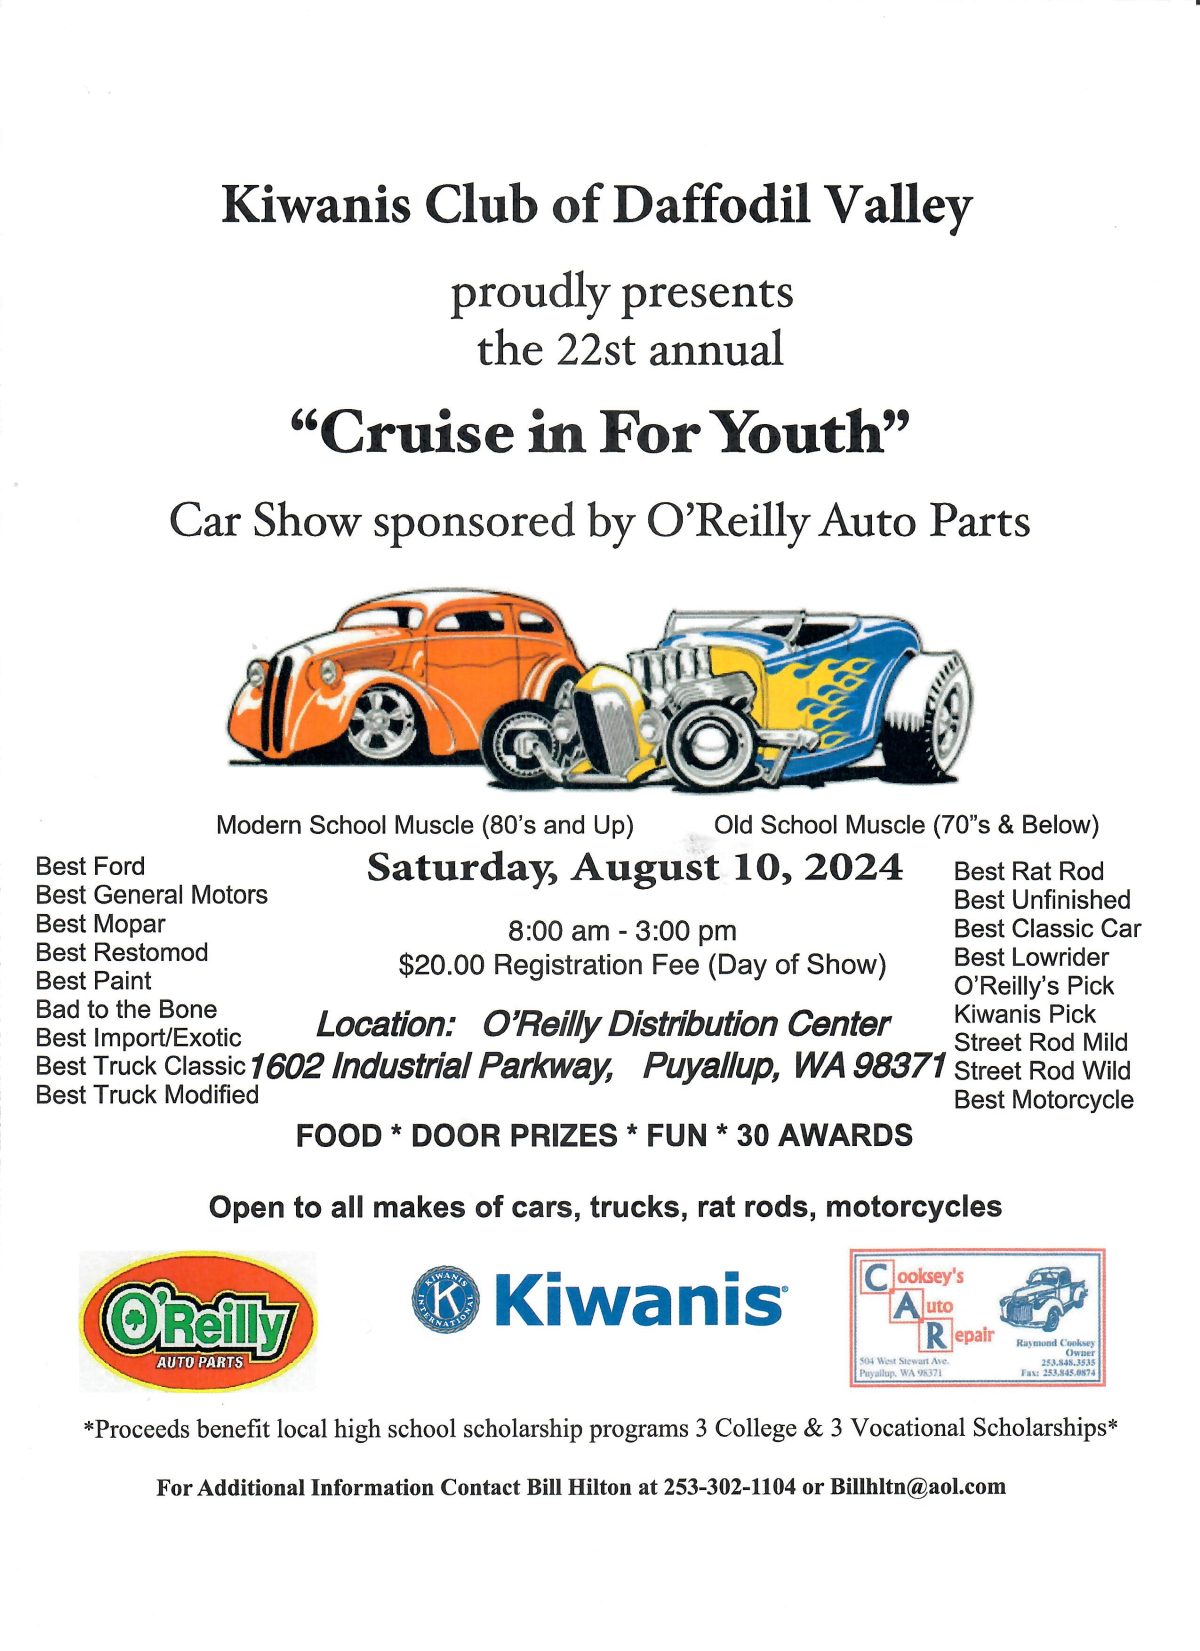 Cruise In For Youth Car Show